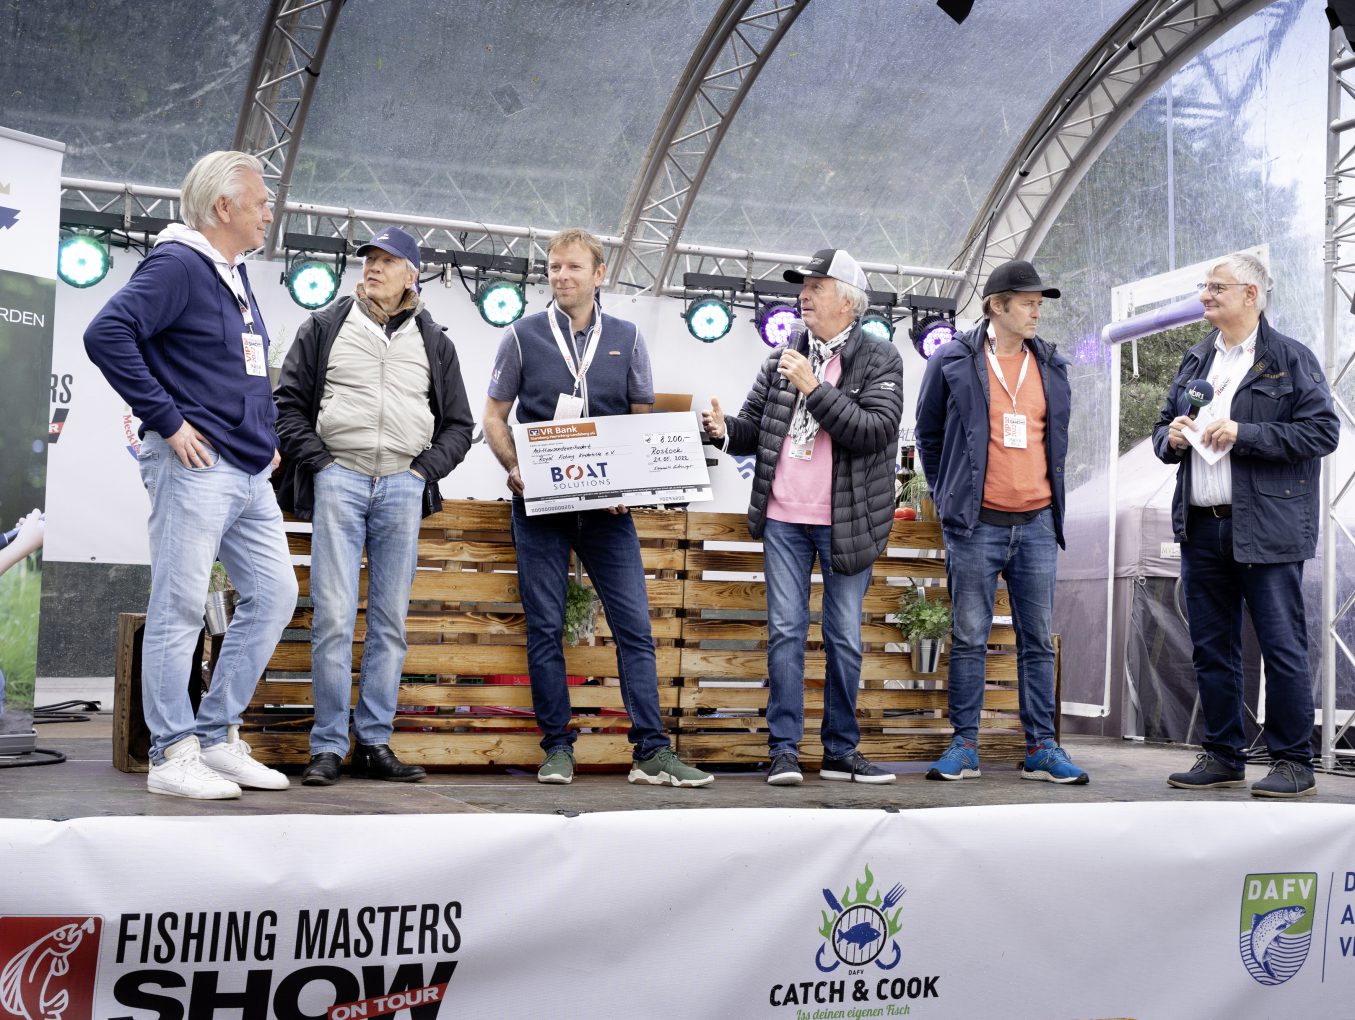 Fishing Masters Show on Tour 2022 in Rostock